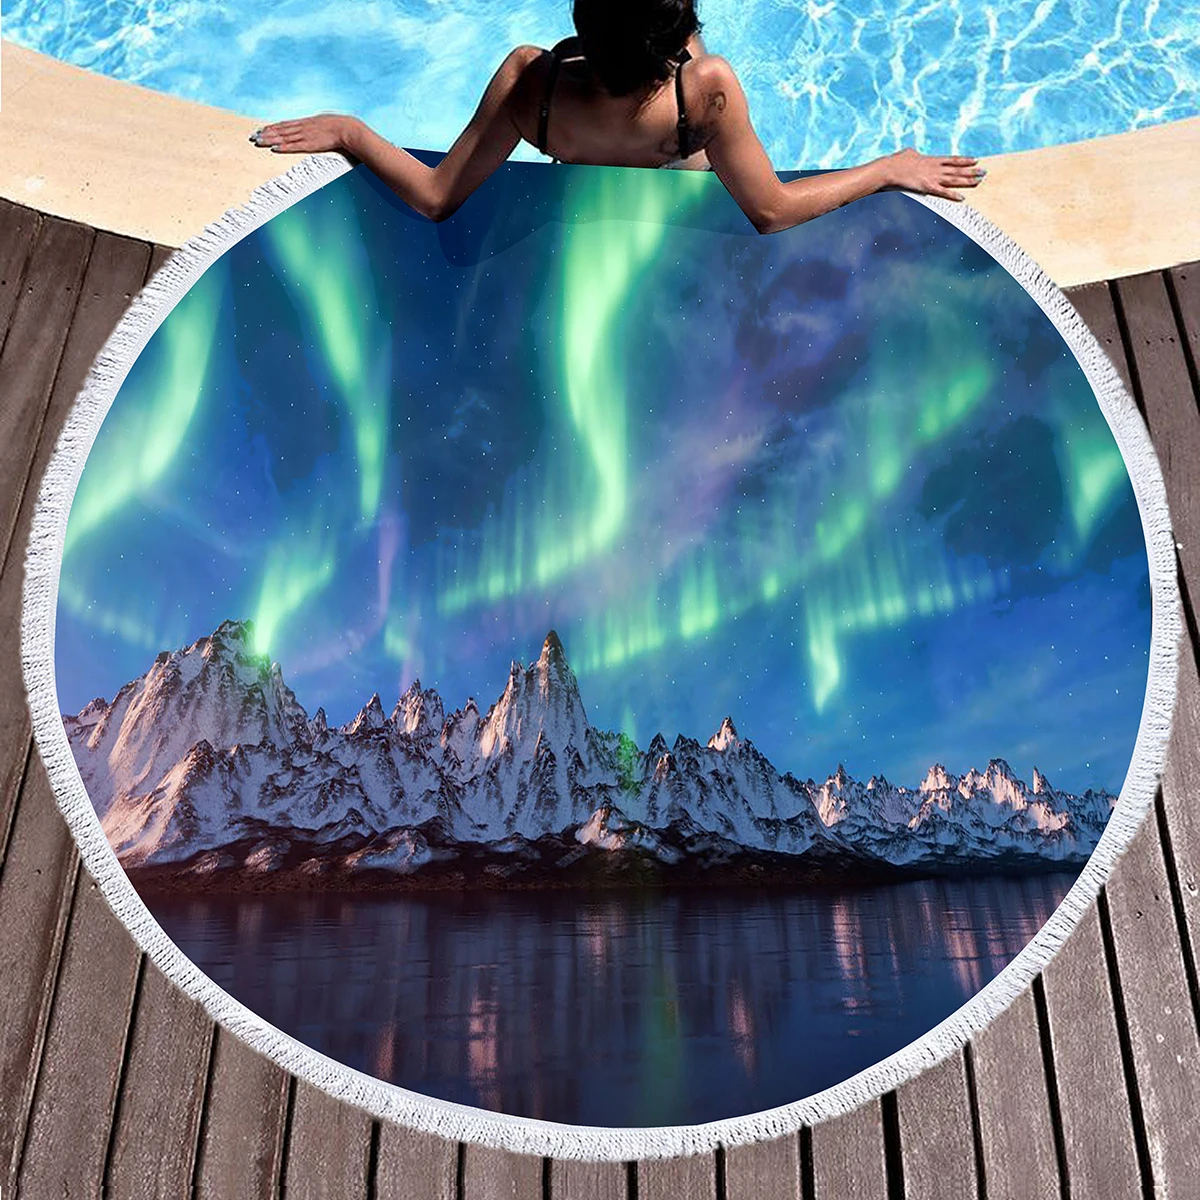 

Beautiful Aurora Round Beach Towels,Polyester Sand Resistant Beach Blankets,Absorbent Quick Dry Pool Towels Portable Picnic Mats